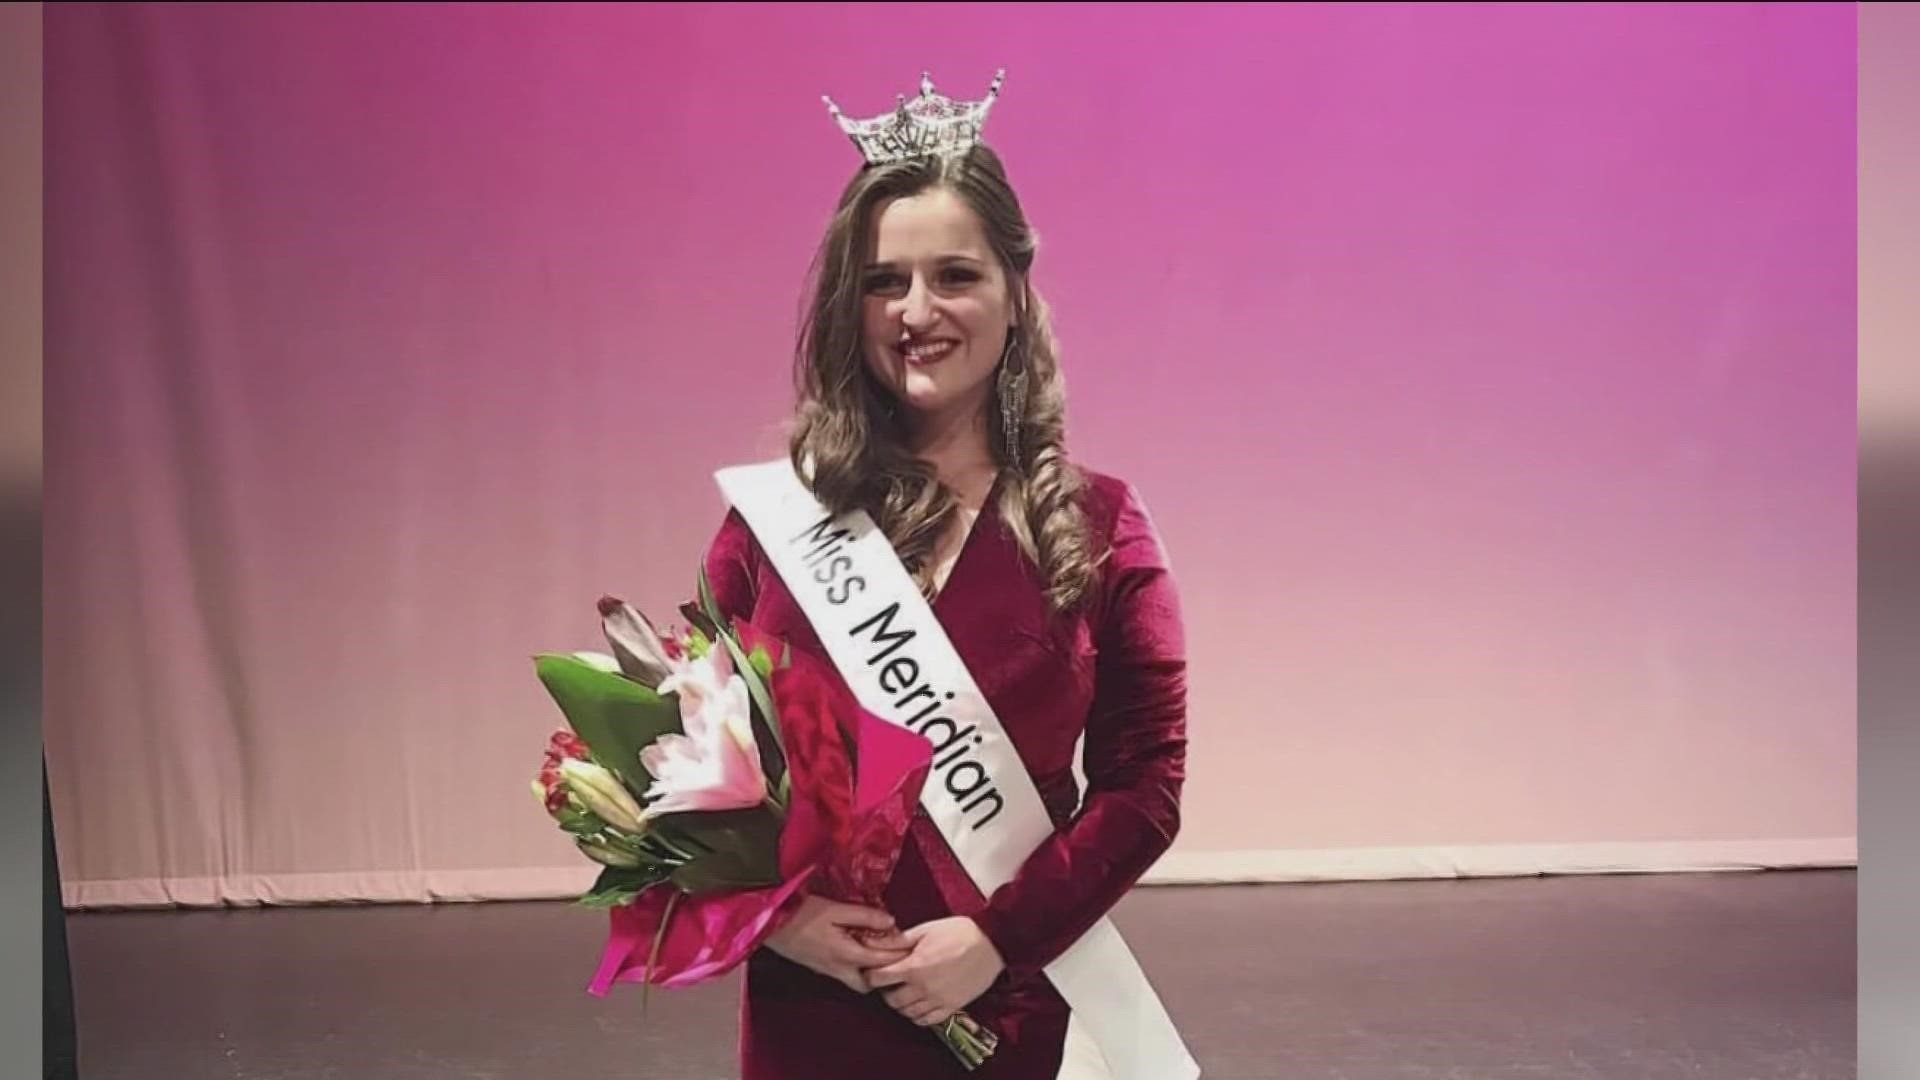 Sarah Jensen is Miss Idaho 2022. She is also a middle school math teacher. She says she will be representing all of her colleagues at Miss America in December.